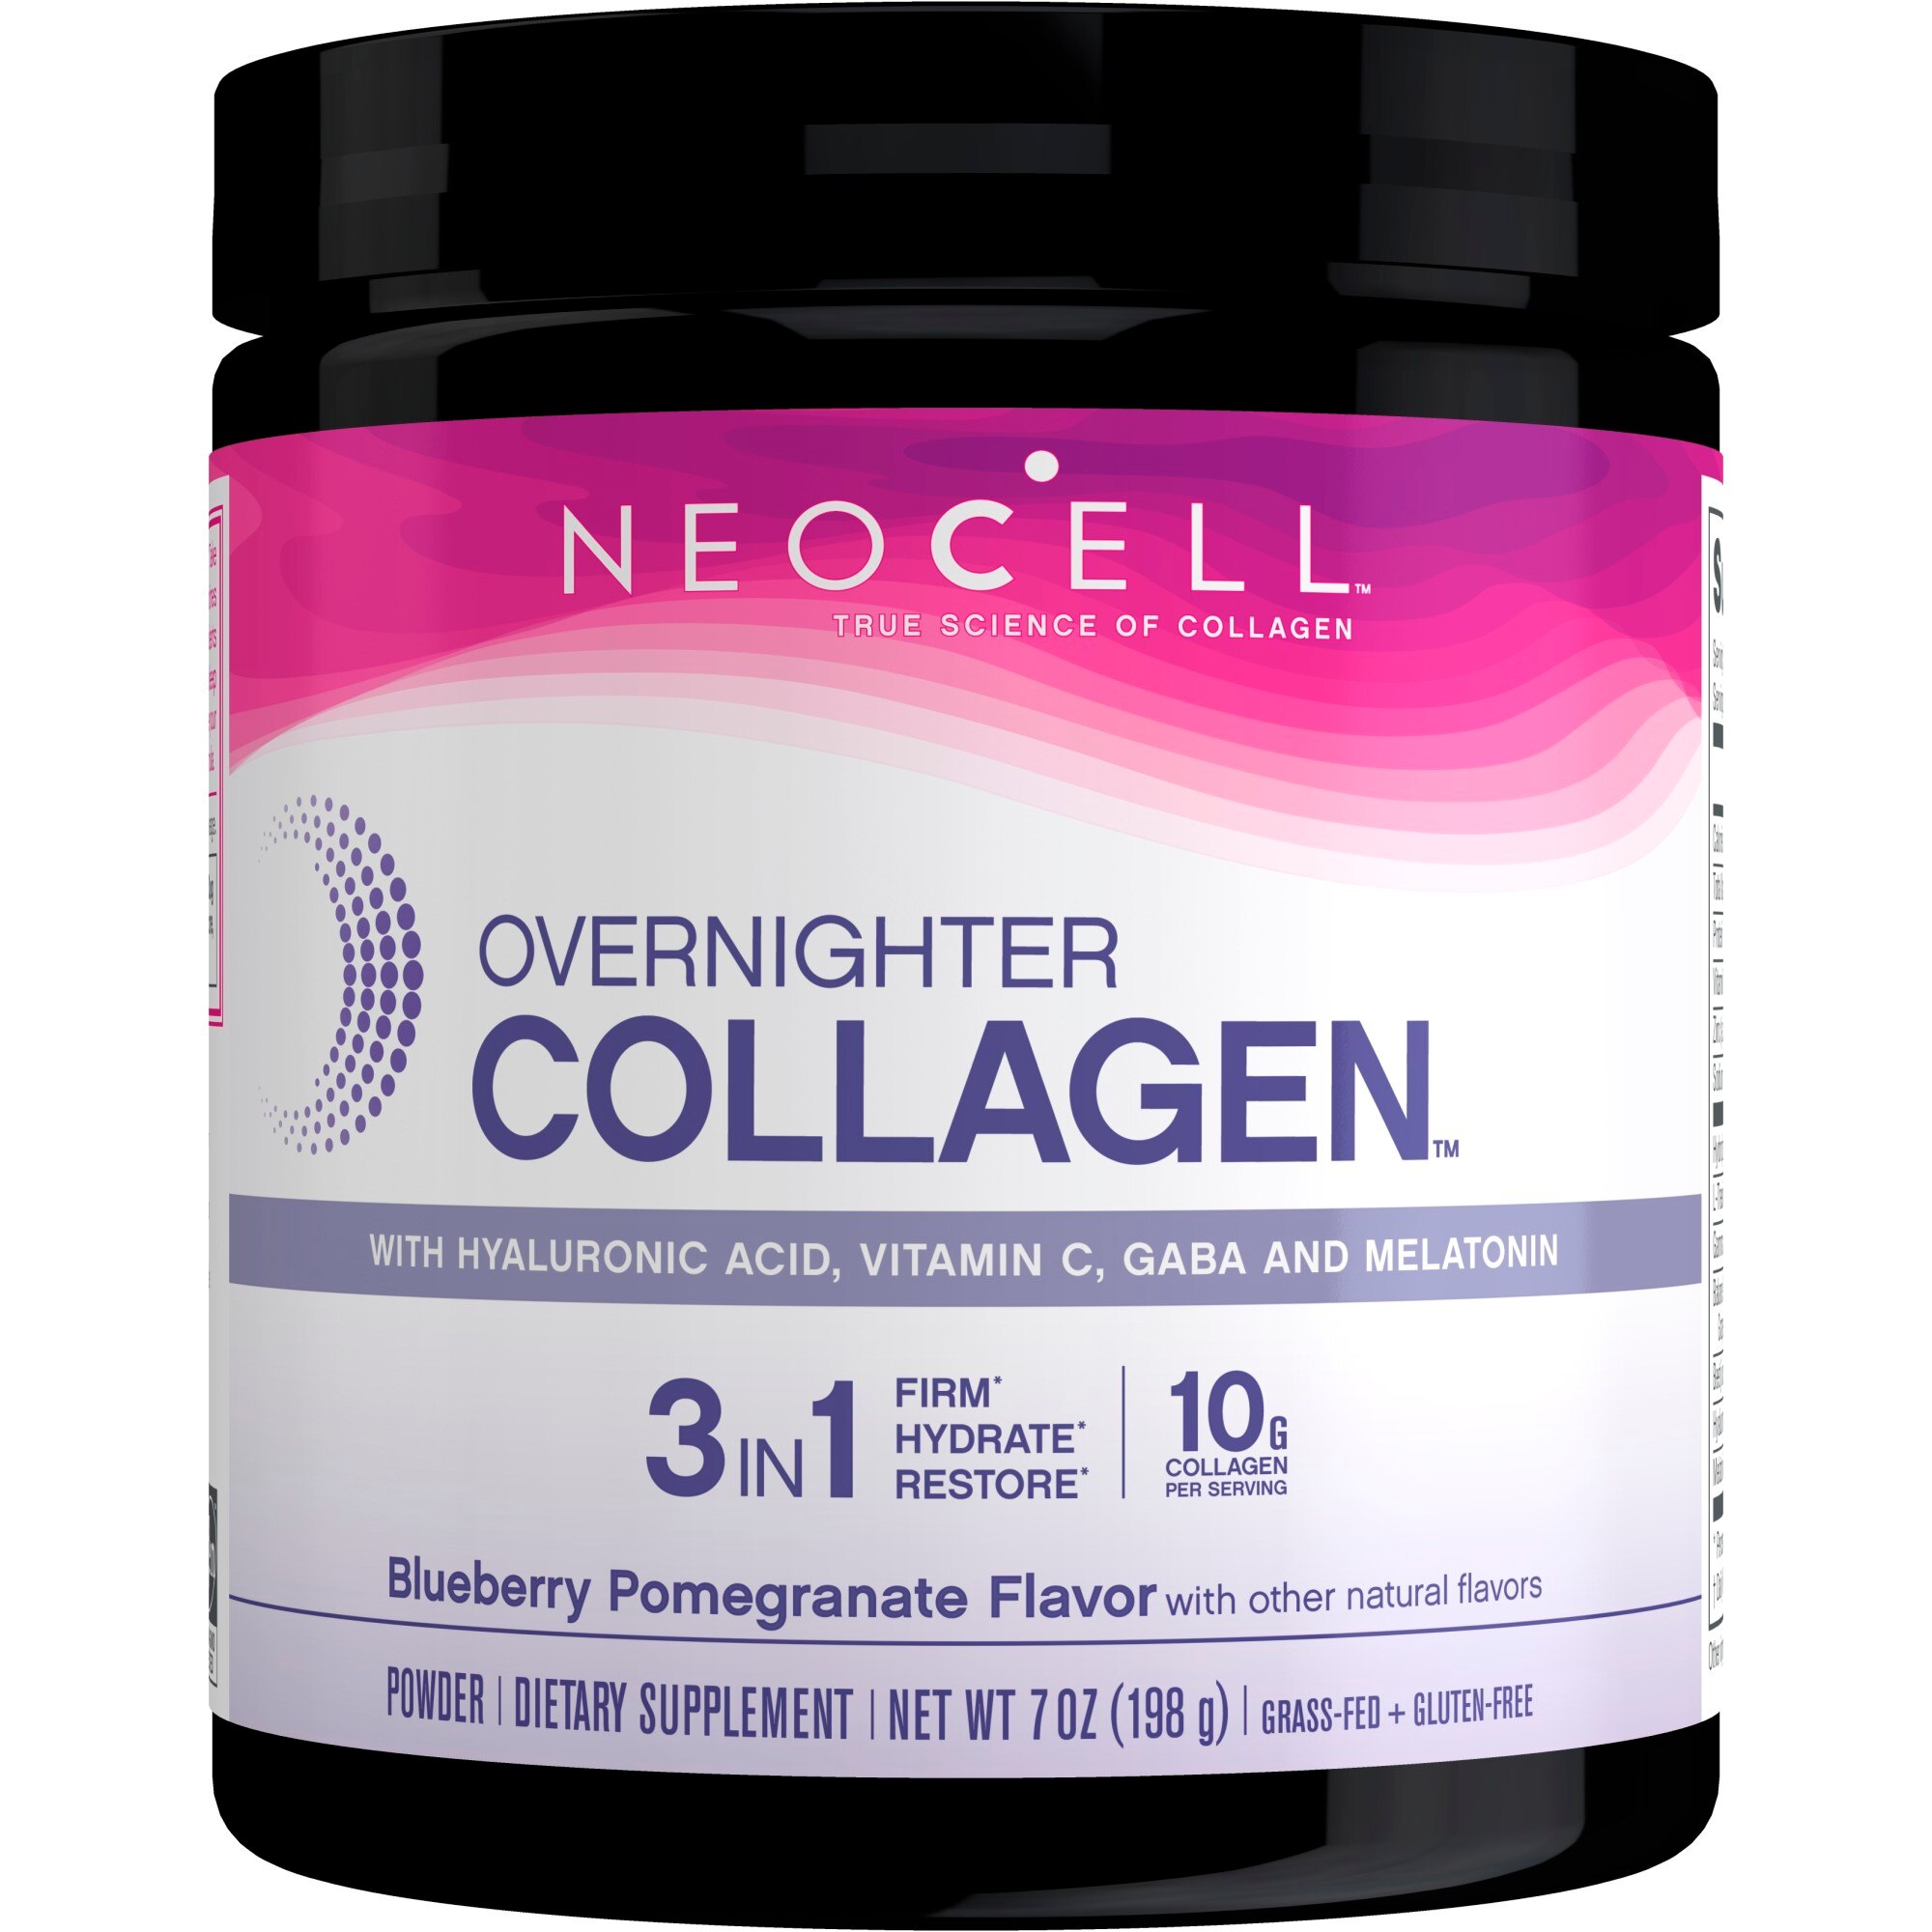 Neocell Overnighter Collagen Powder, 3 in 1 Firm Hydrate Restore, 7 OZ